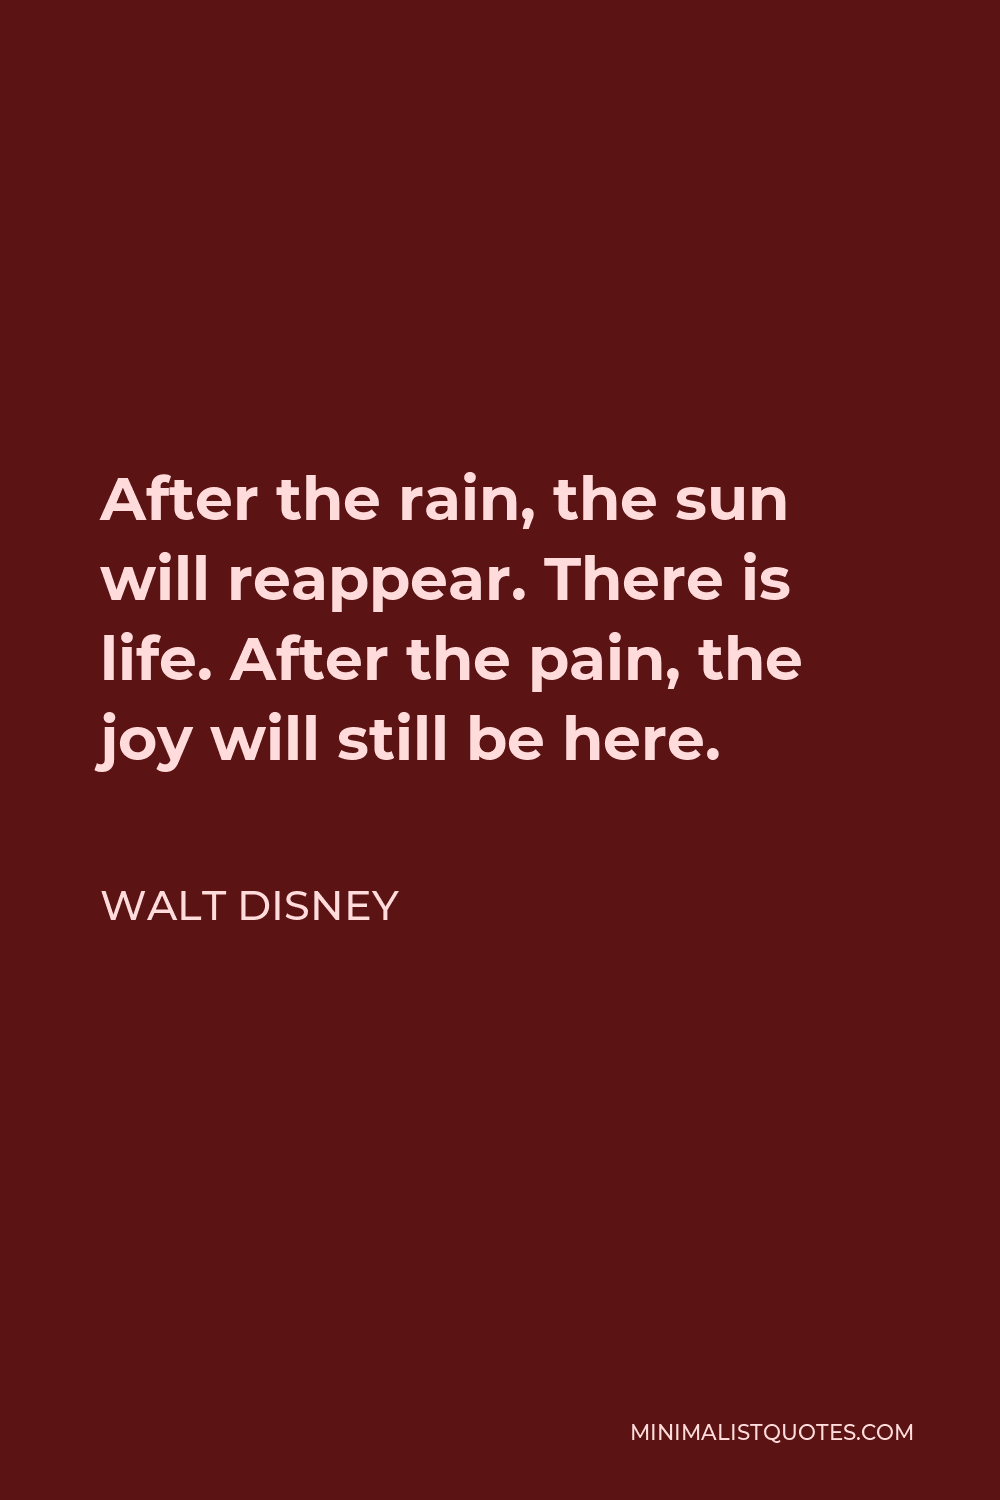 Walt Disney Quote - After the rain, the sun will reappear. There is life. After the pain, the joy will still be here.